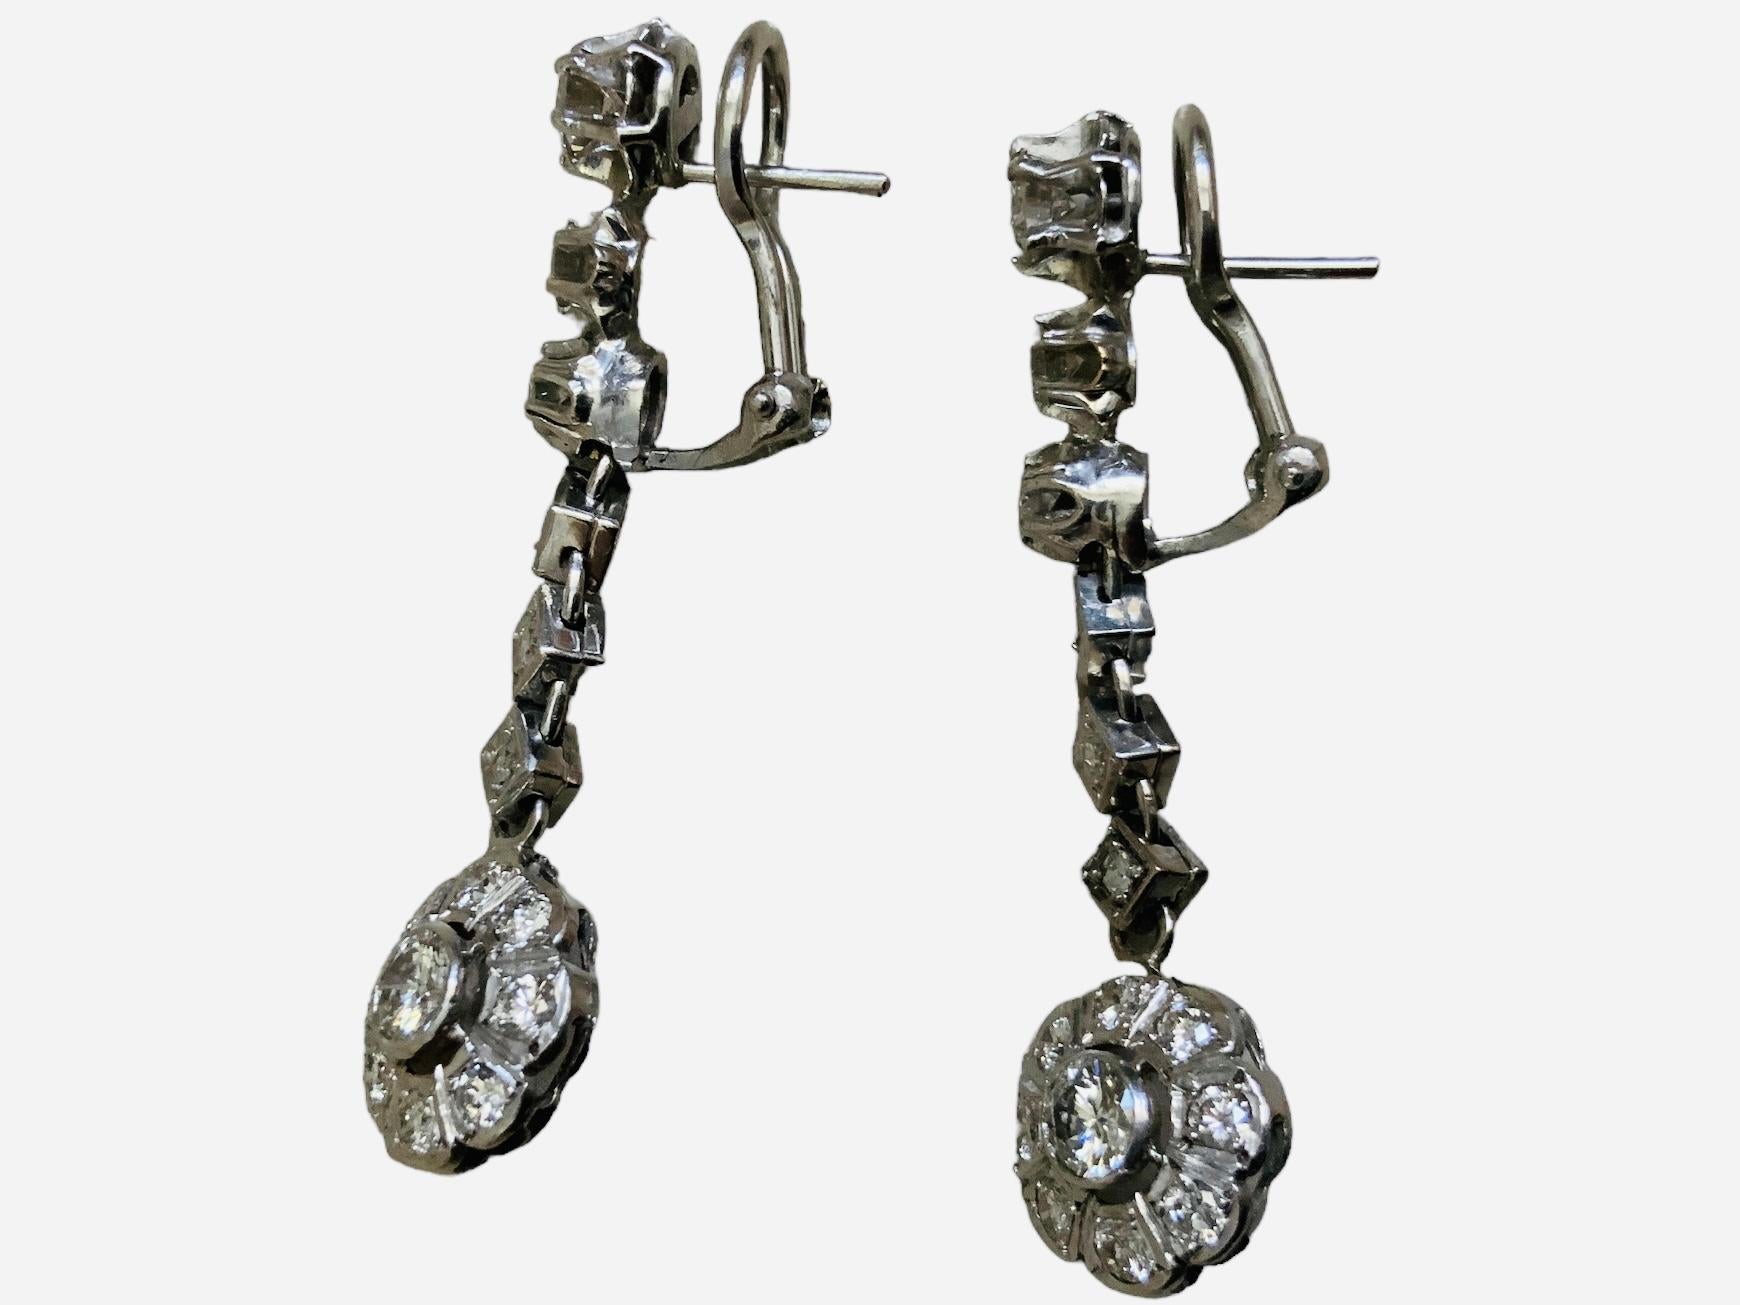 This a Pair of 14K White Gold Diamonds Earrings. It depicts a pair of dangle earrings consisting of a chain made of graduated round diamonds mounted in prong and pave settings ending in a flower with a large round diamond on bezel setting in the